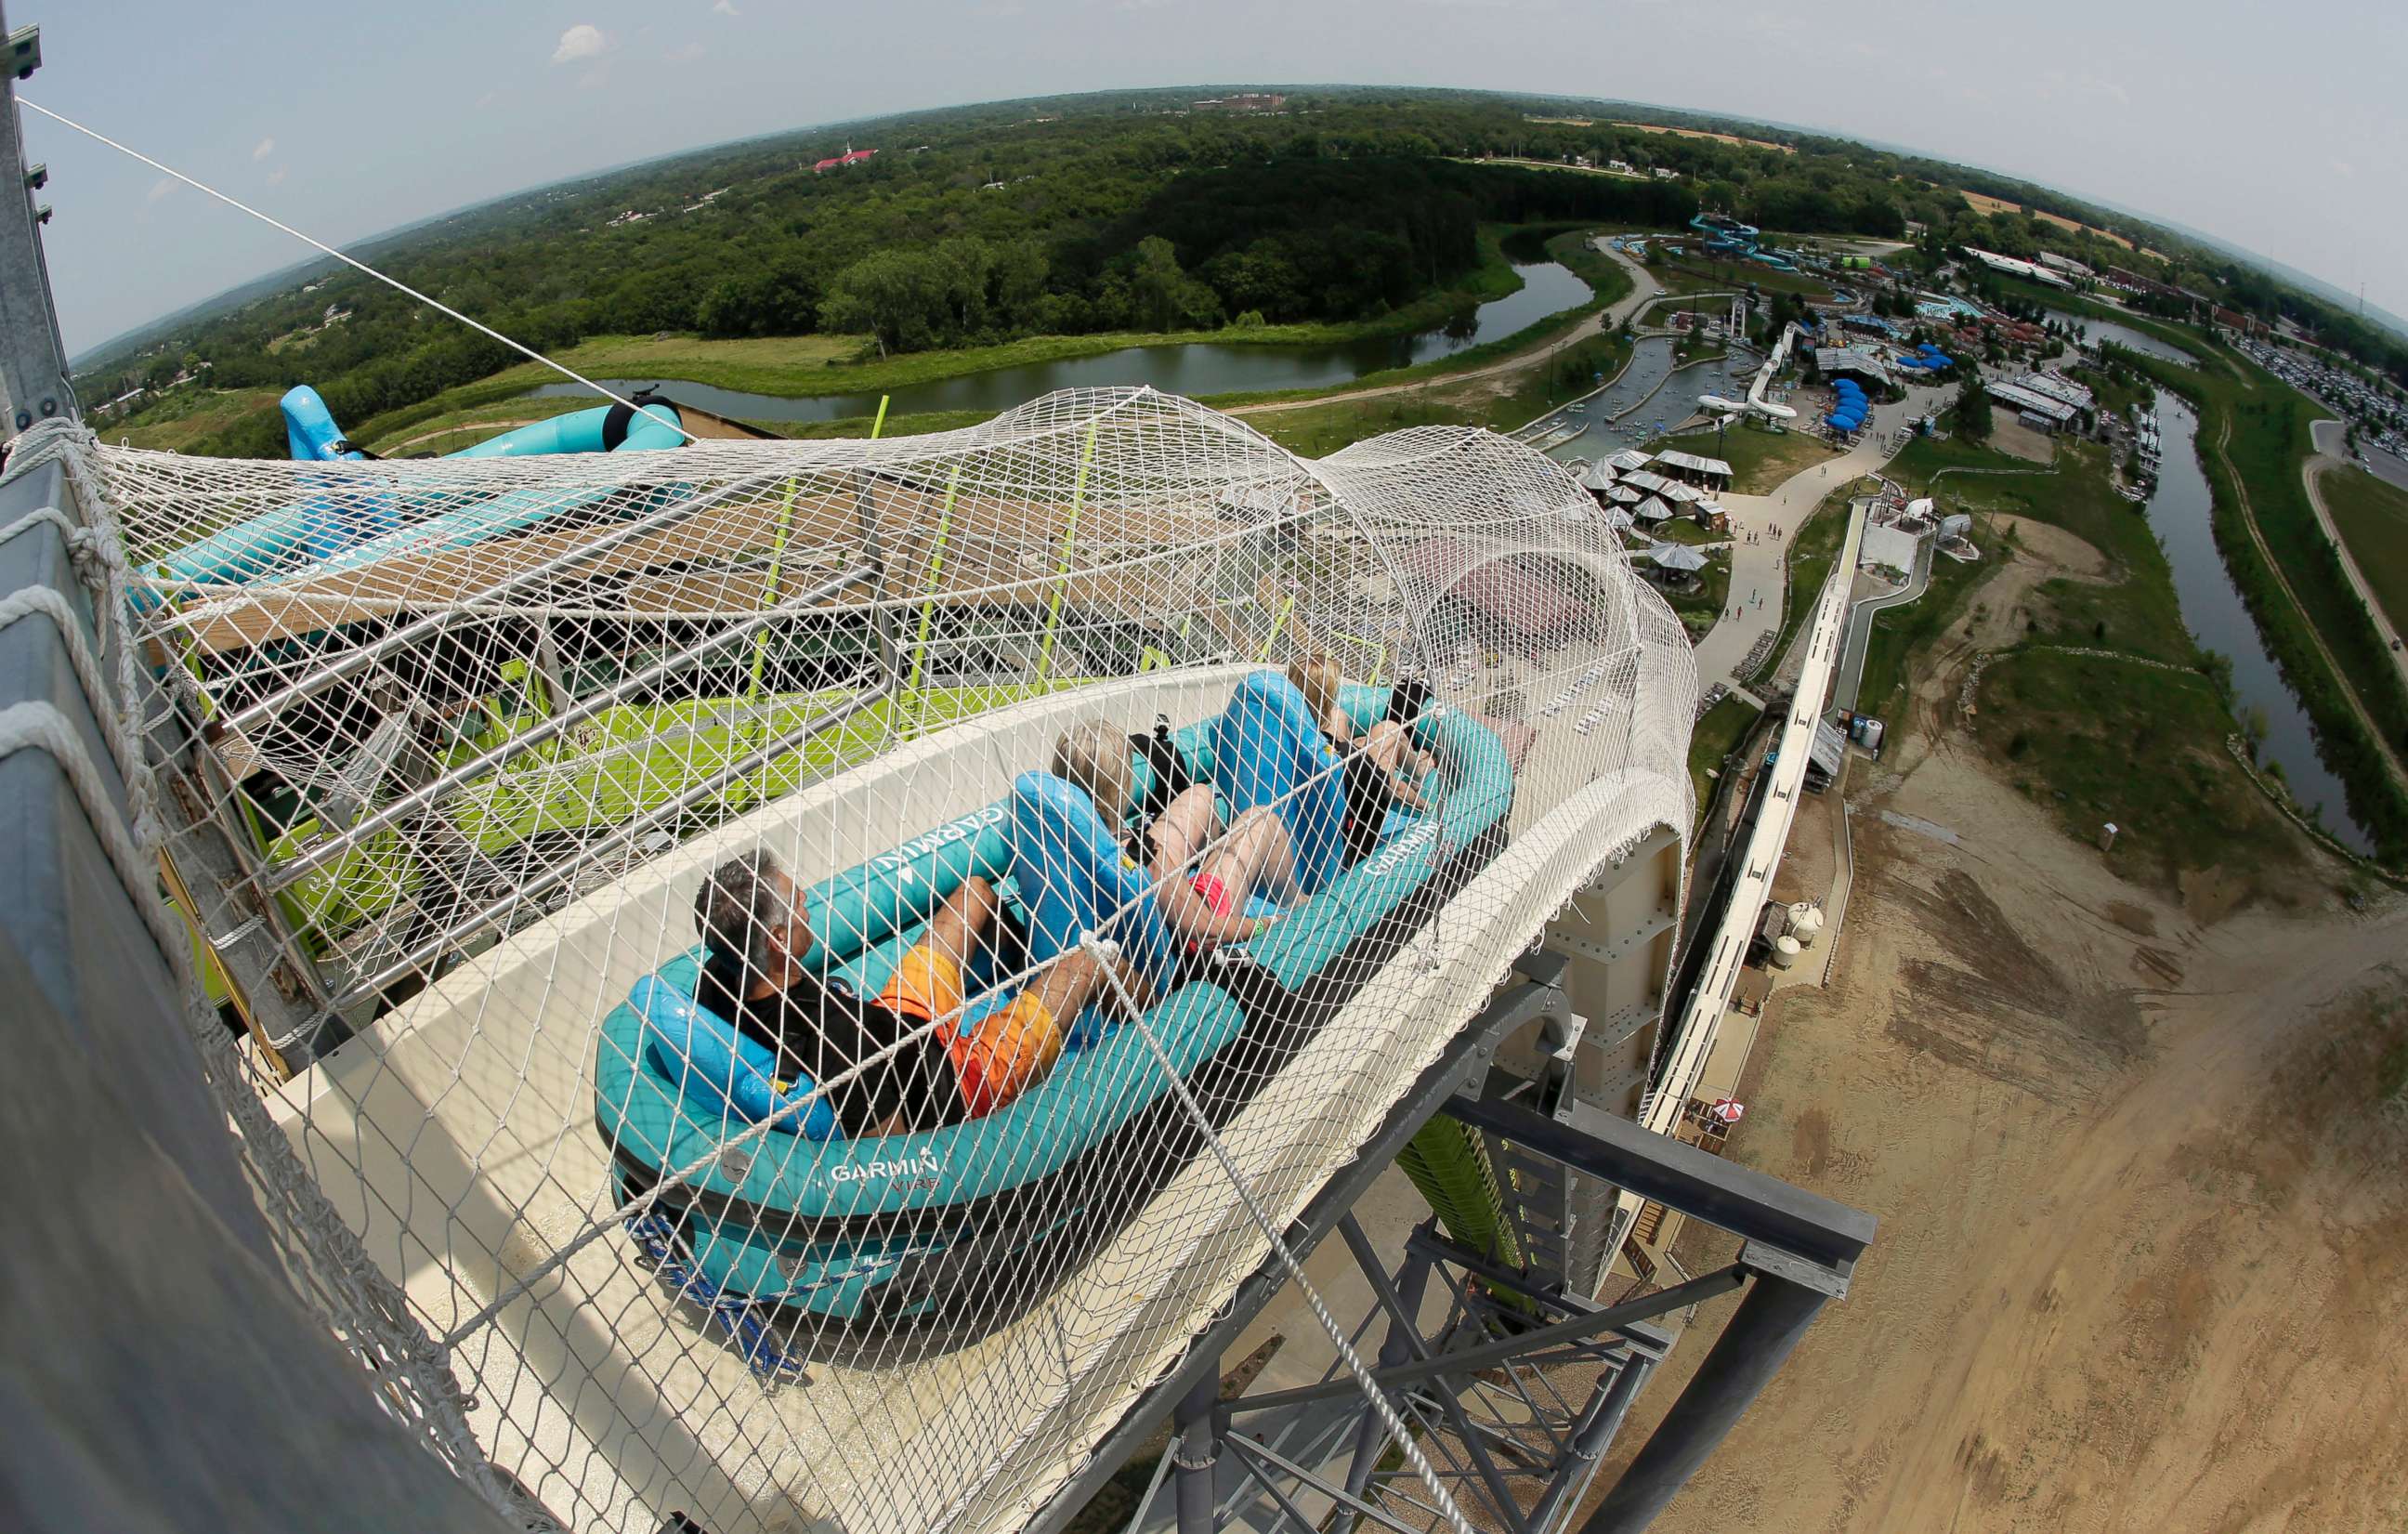 PHOTO: In this July 9, 2014, file photo, riders go down the water slide called "Verruckt" at Schlitterbahn Waterpark in Kansas City, Kan.